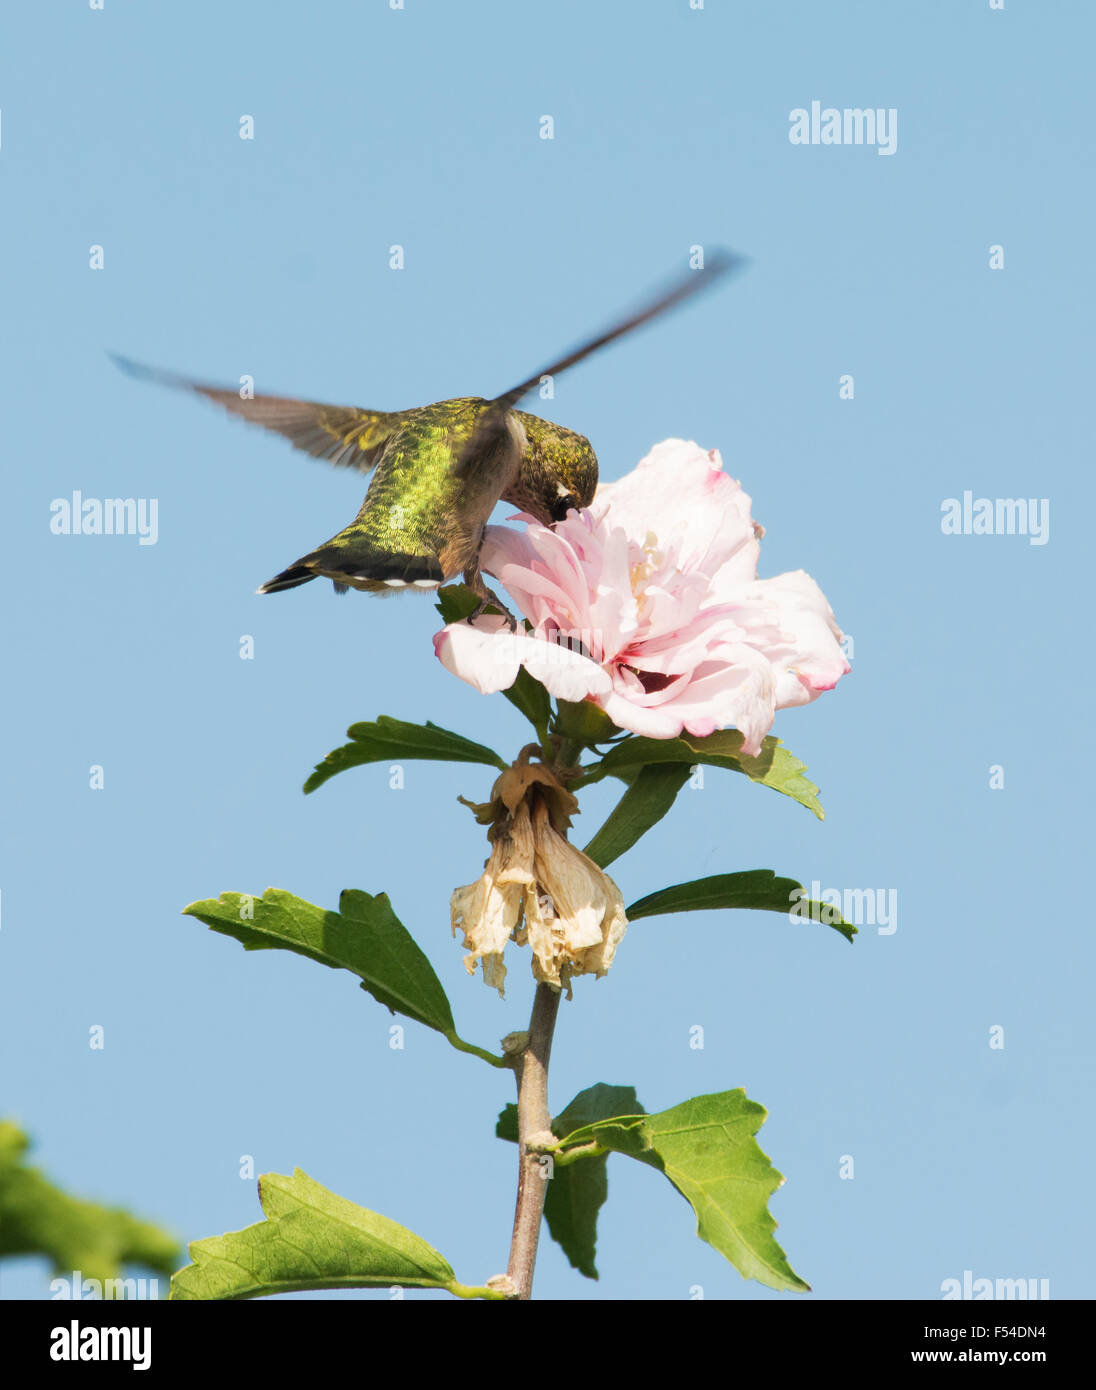 Hummingbird feeding on a light pink flower while hovering, with blue sky background Stock Photo